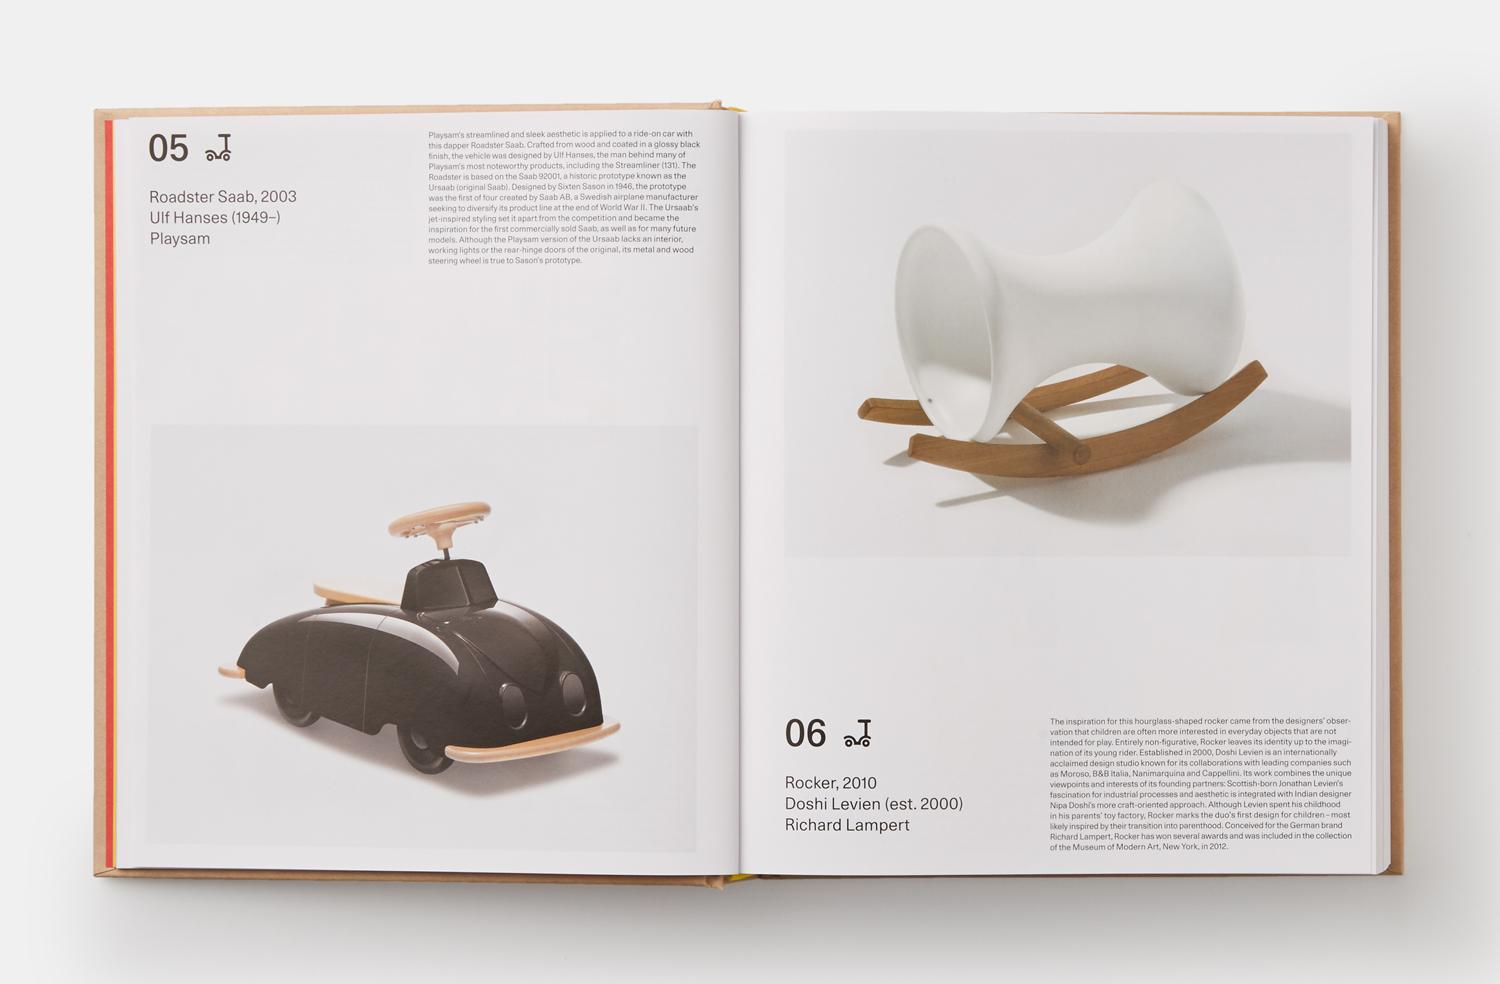 A comprehensive, genre-defining survey of children's product and furniture design from Bauhaus to today 

Design for Children, a must-have book for all style-conscious and design-savvy readers, documents the evolution of design for babies, toddlers,